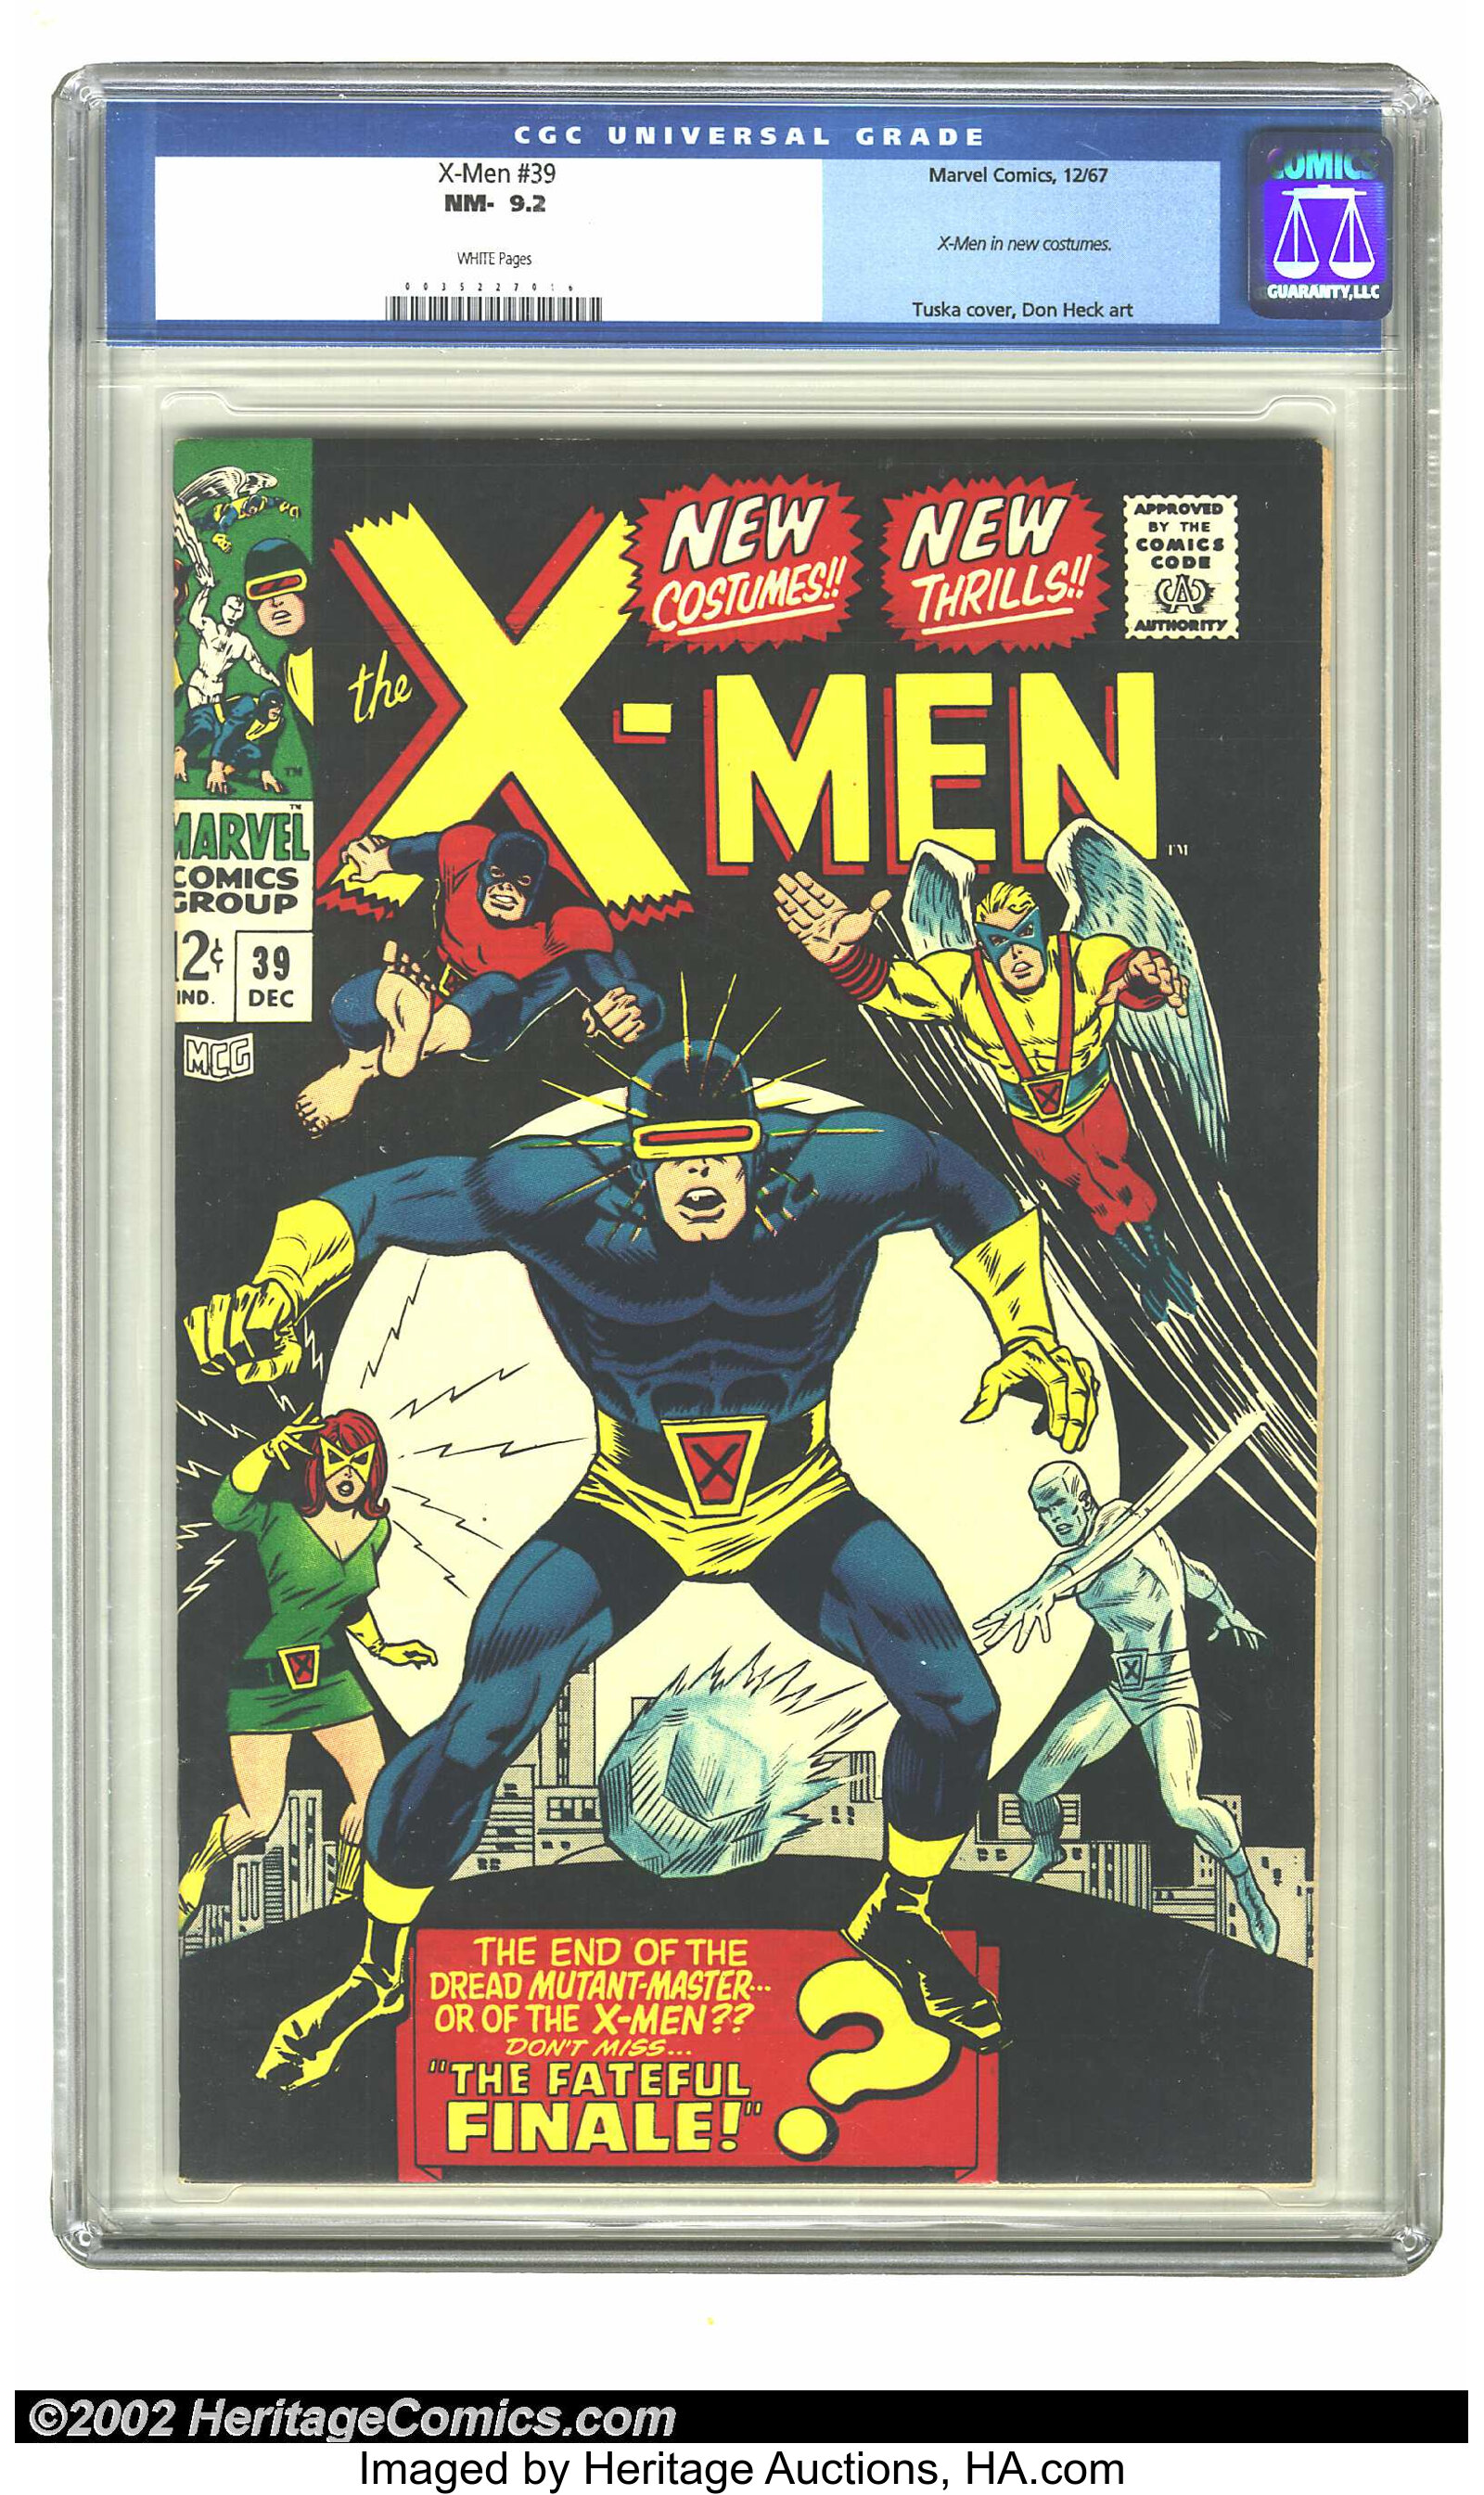 X Men 39 Marvel 1967 Cgc Nm 9 2 White Pages This Supreme Copy Lot 5857 Heritage Auctions